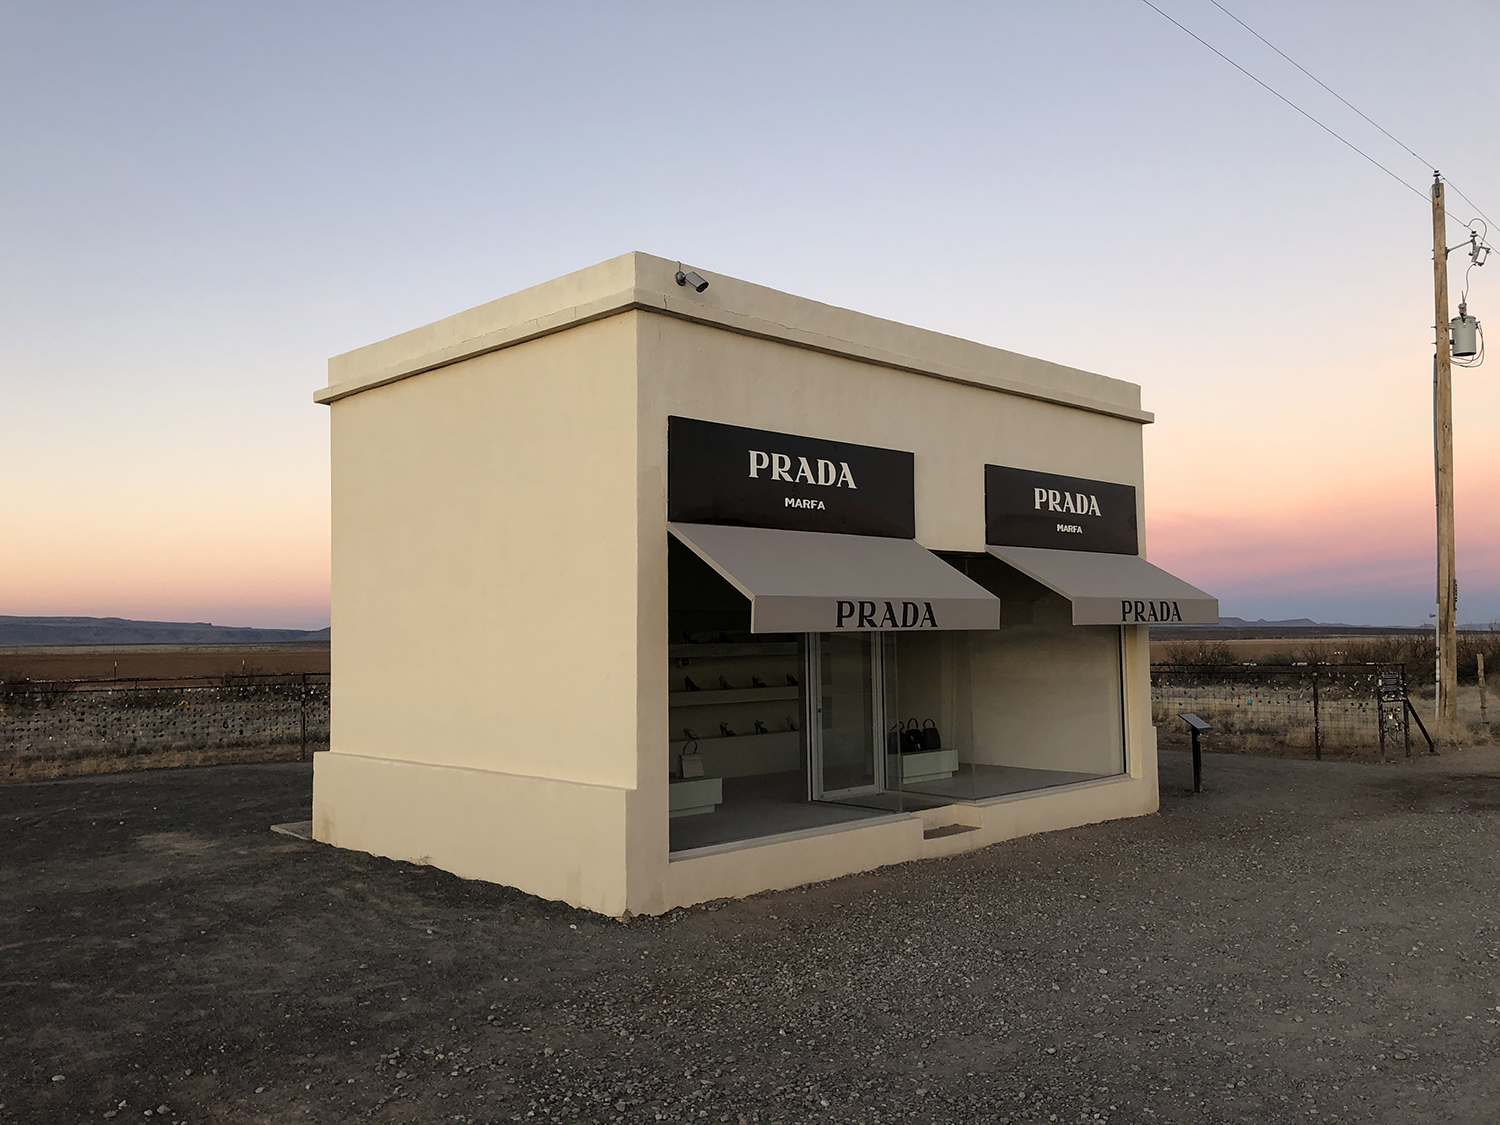 Picture of the Week: Prada Marfa and the Milky Way - Andy's Travel Blog